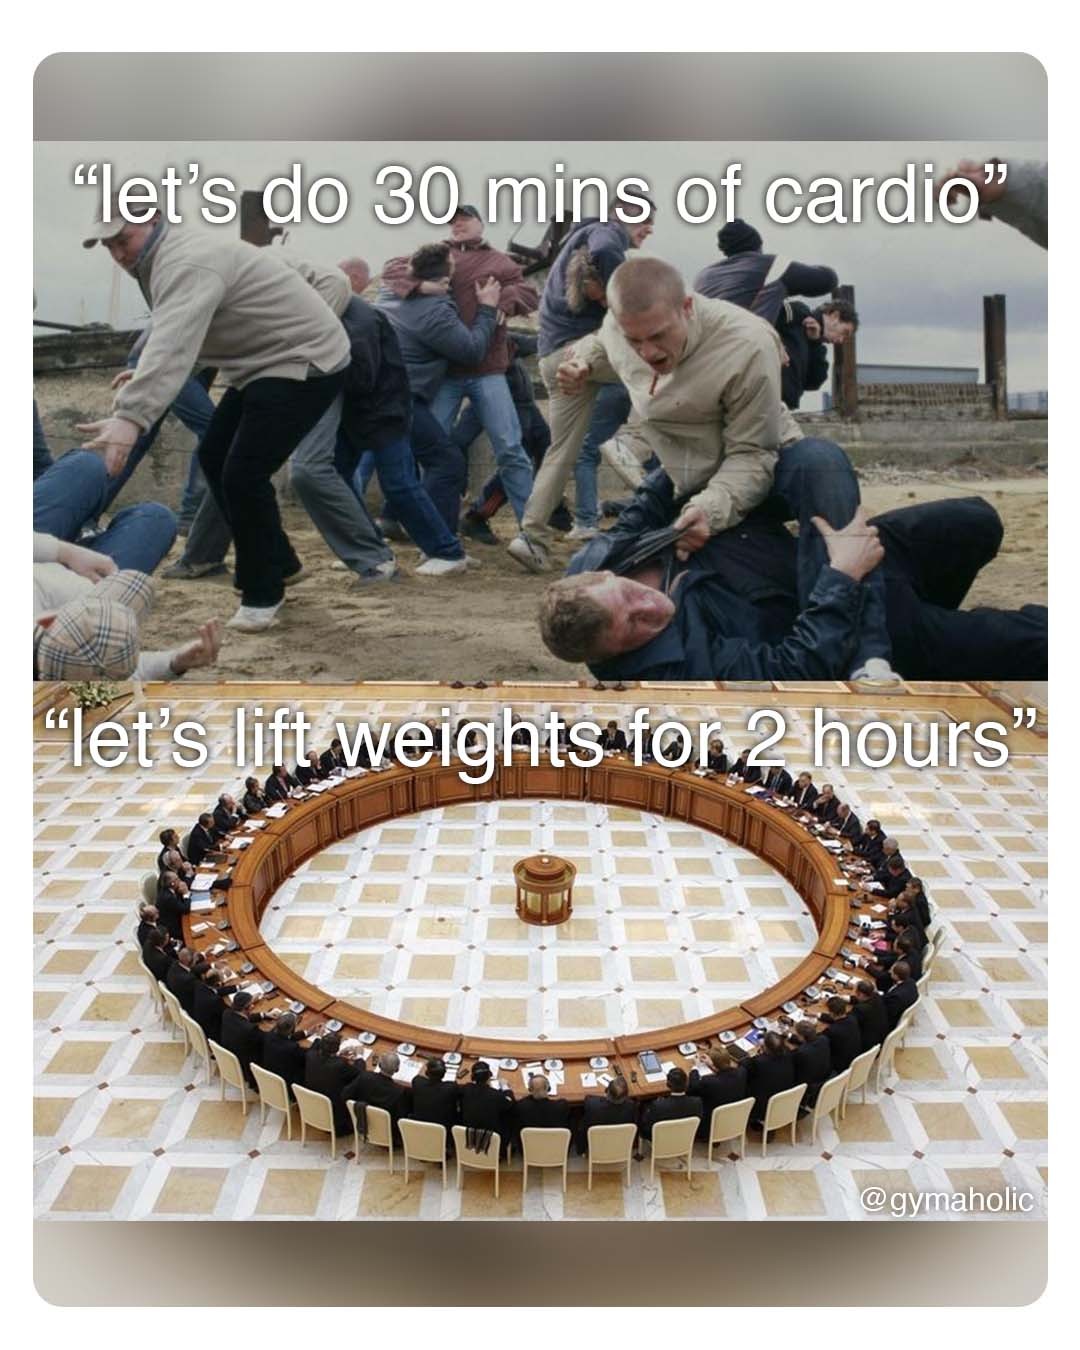 Let’s do 30 mins of cardio